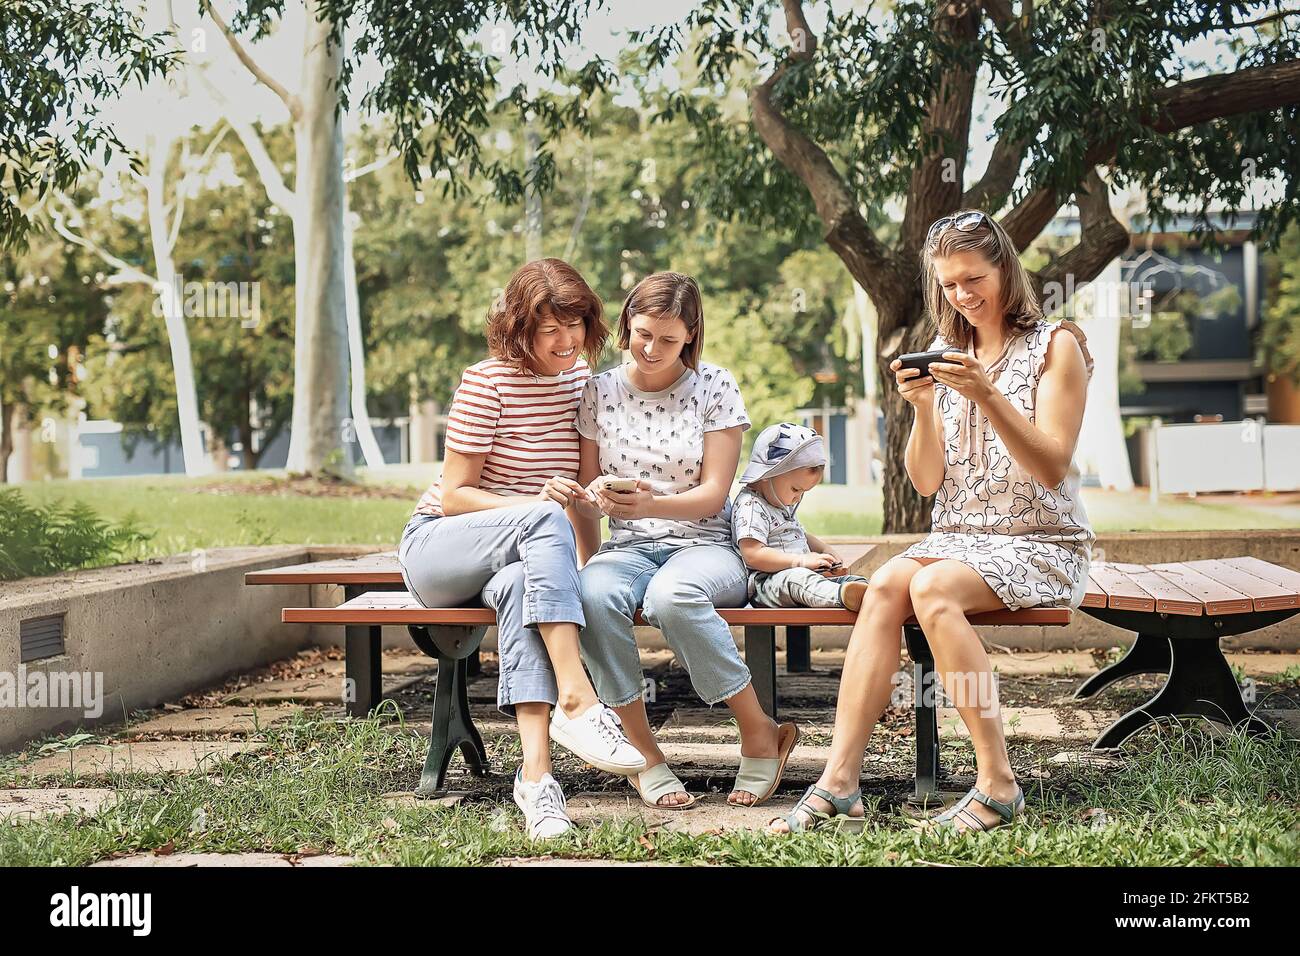 Three women friends with baby strollers reading text message in park Stock Photo